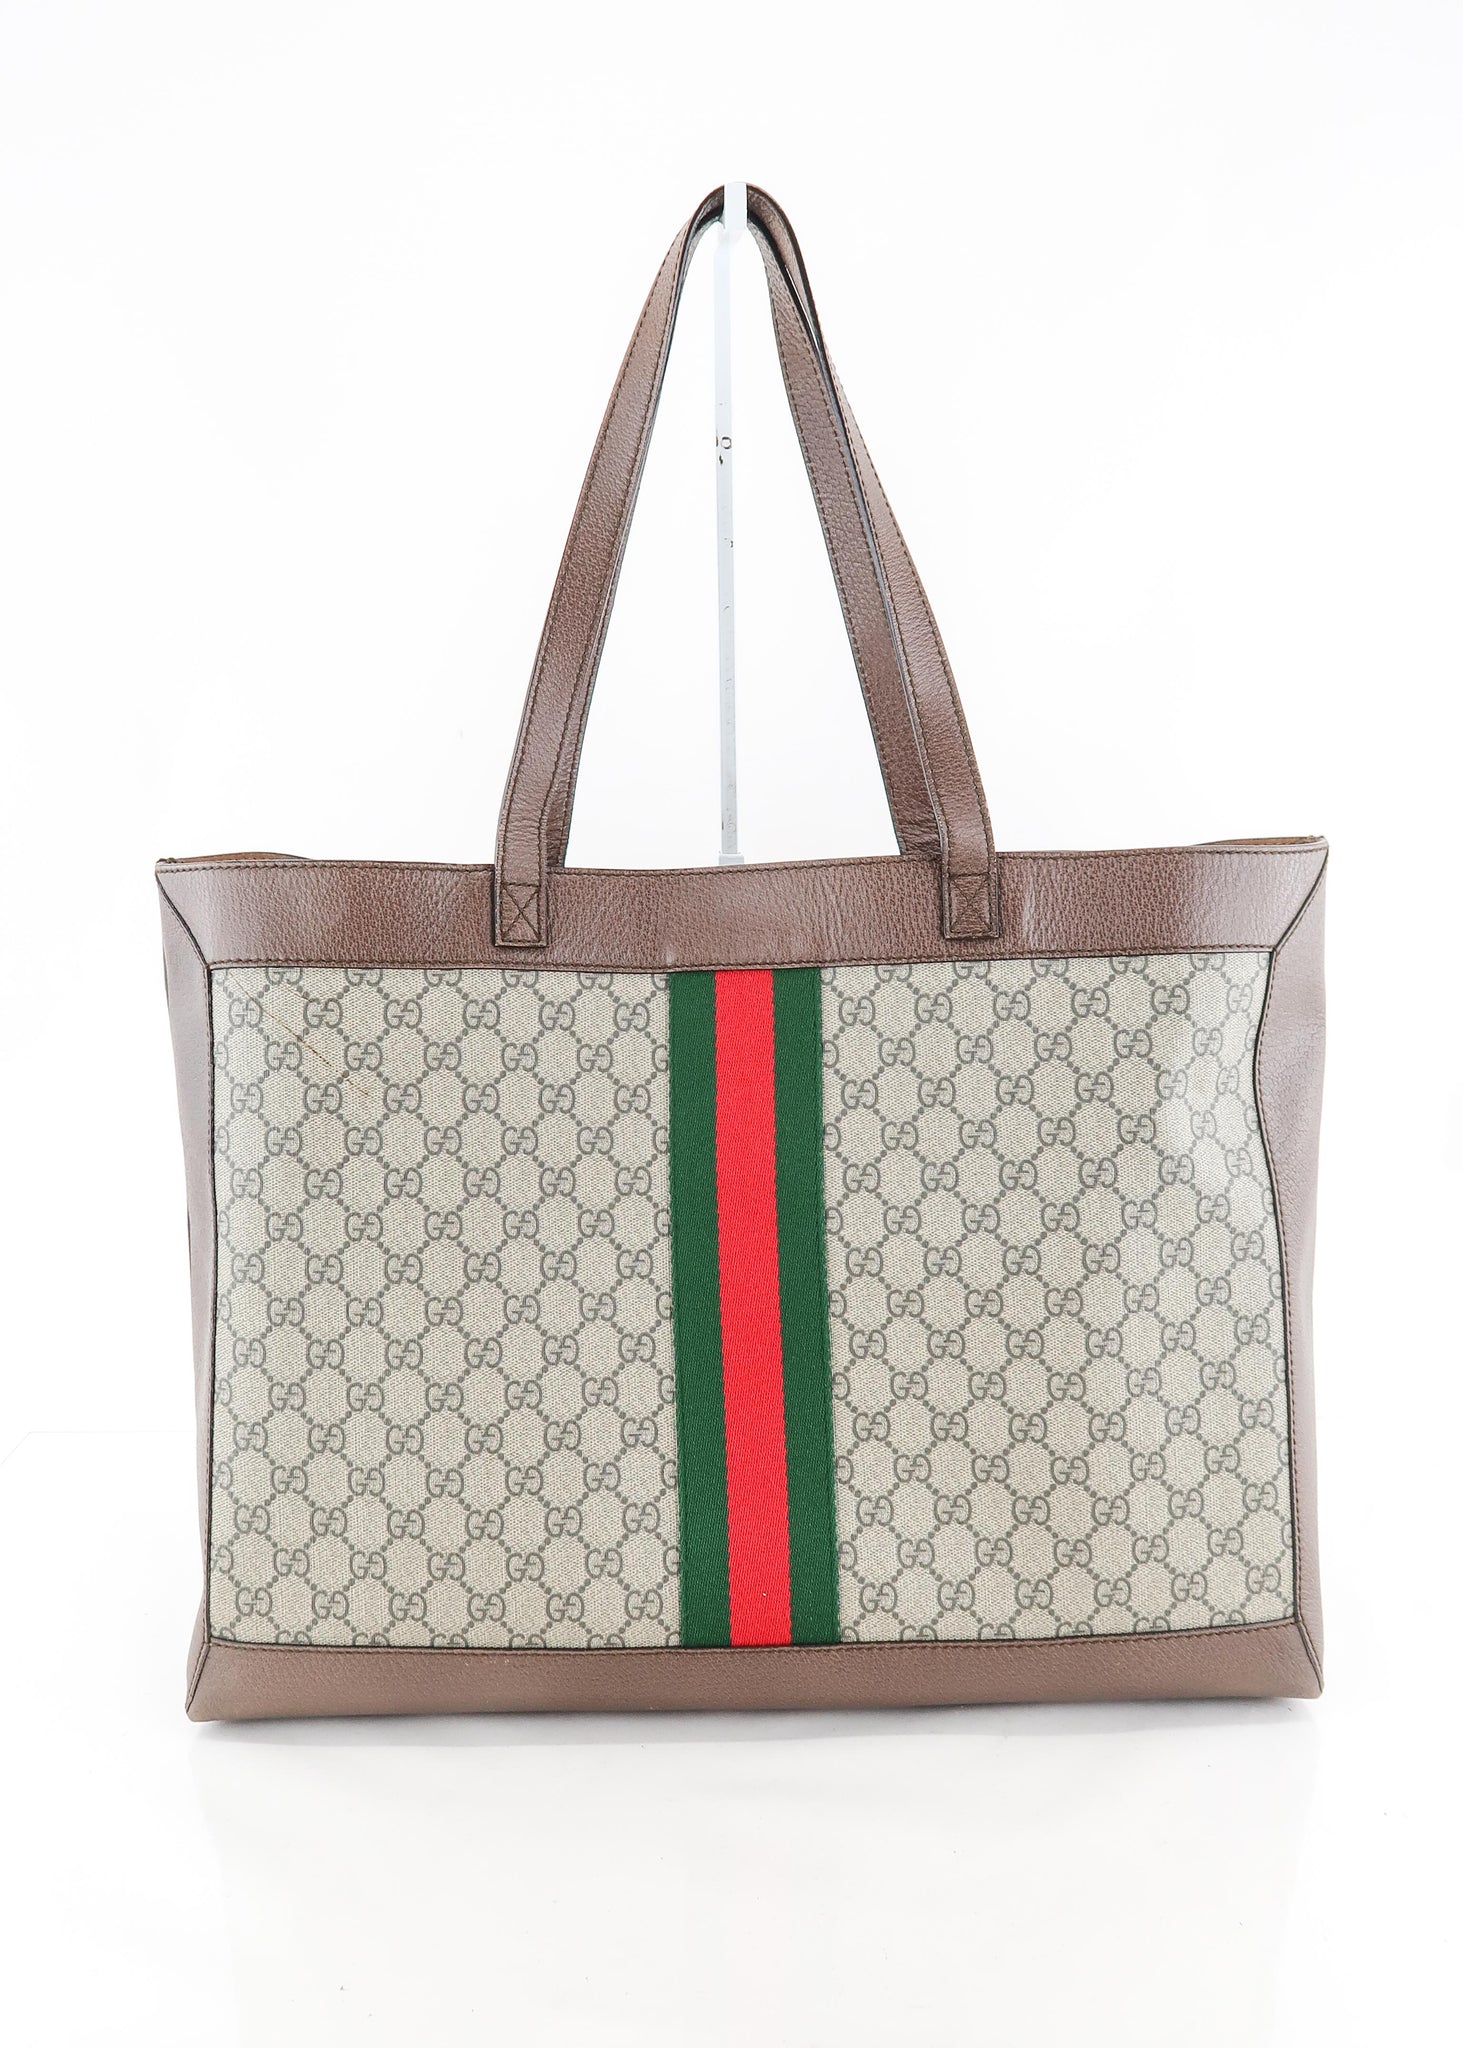 Authentic Gucci GG Supreme Canvas Ophidia Large Shoulder Tote Bag